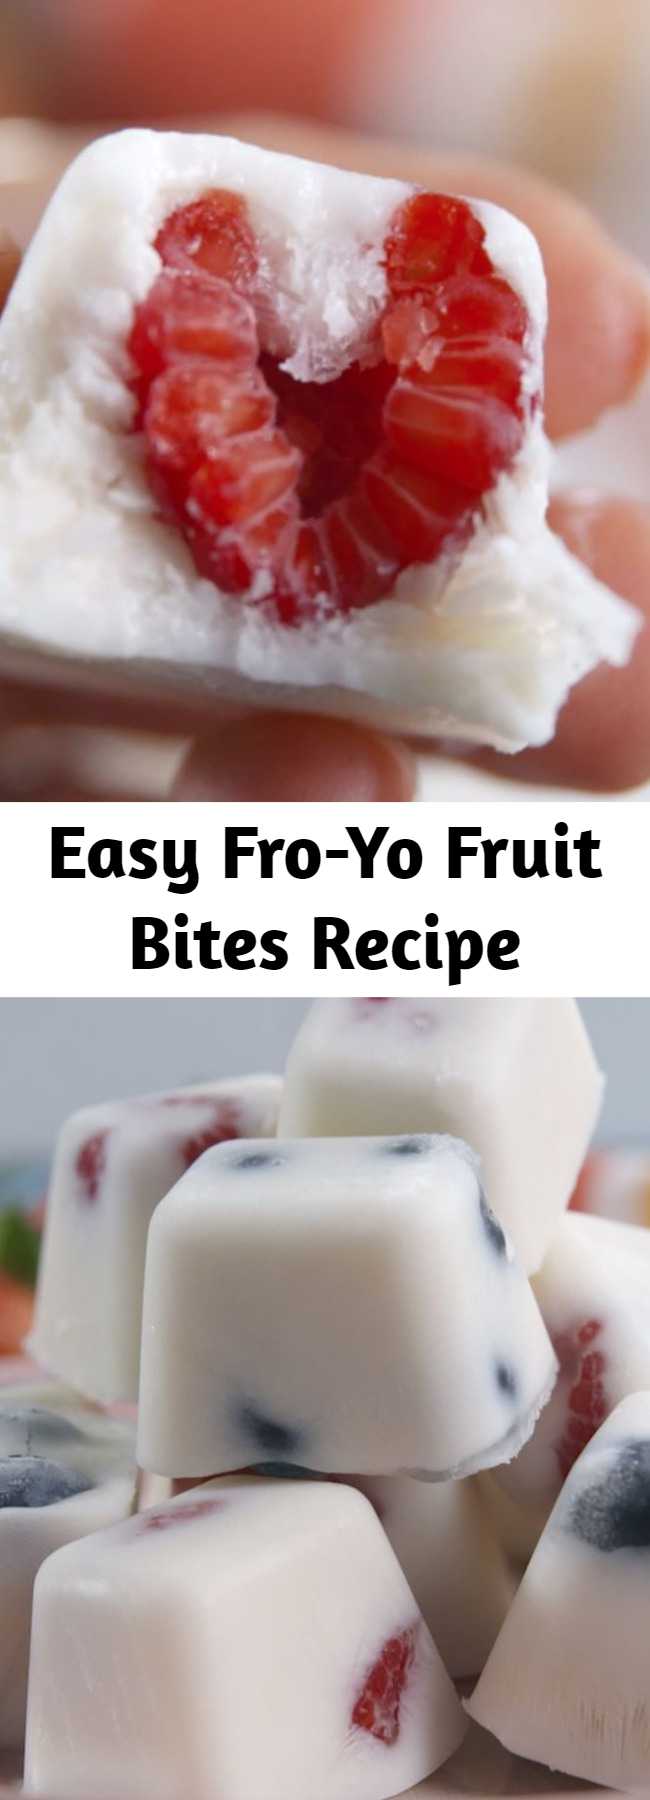 Easy Fro-Yo Fruit Bites Recipe - These fro-yo fruit bites make the perfect breakfast or healthy any-time snack.